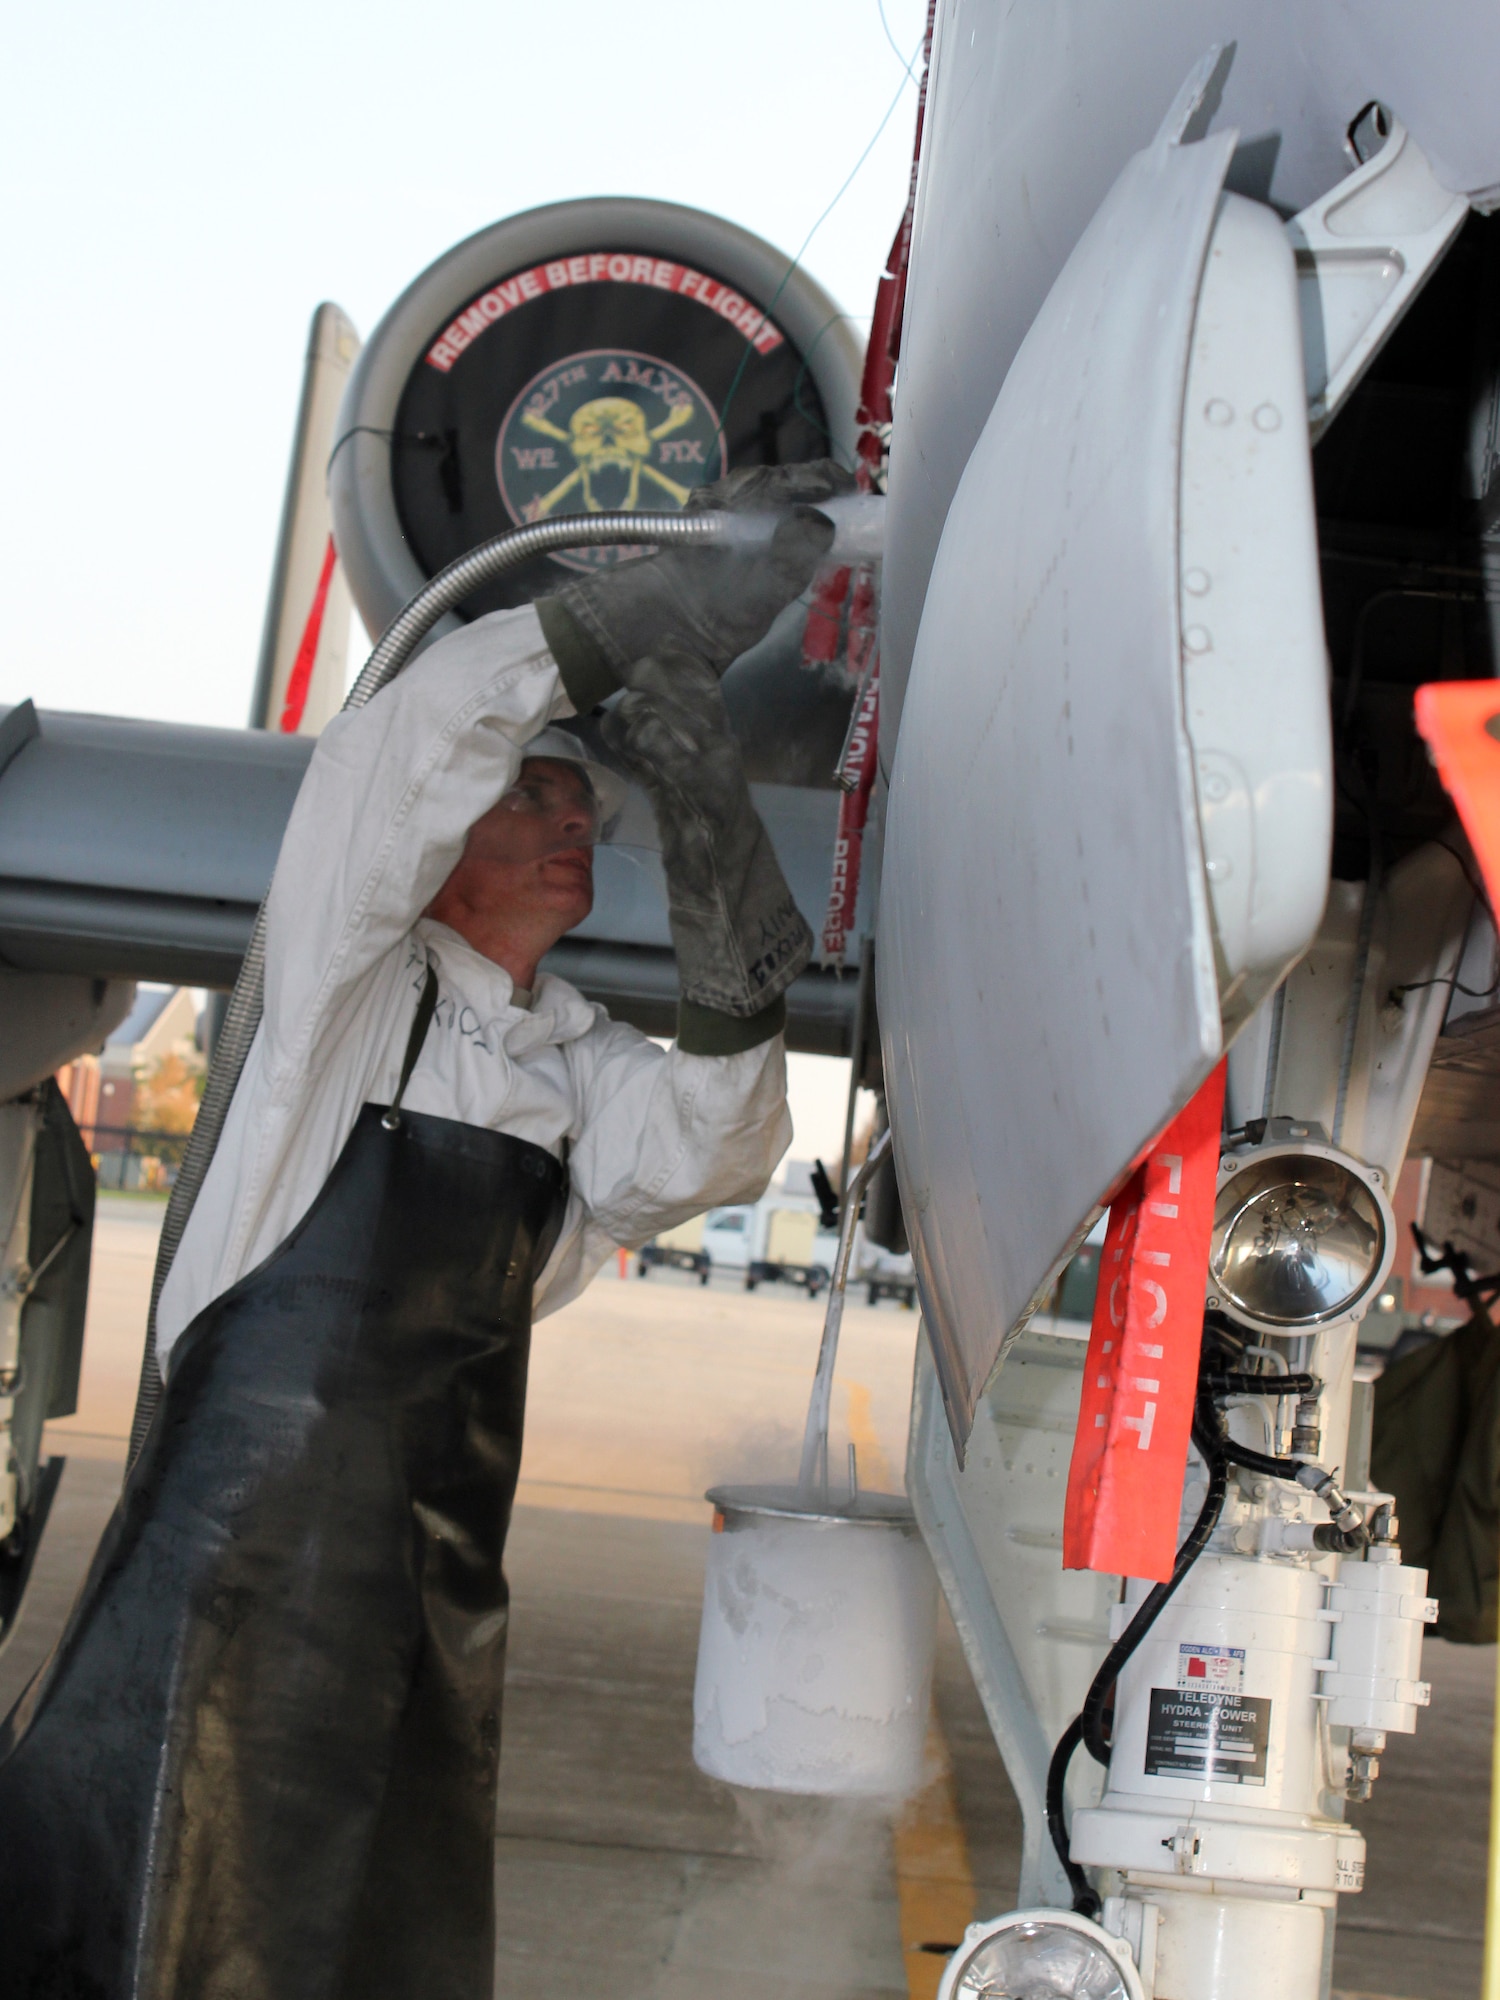 130829-Z-VA676-096 -- Staff Sgt. Scott Dykstra, a crew chief with the 127th Wing, services an A-10 Thunderbolt II with liquid oxygen, or LOX, during routine operations at Selfridge Air National Guard Base, Mich., Aug. 29, 2013. Though the use of LOX is now routine at Selfridge and across the Air Force, it wasn’t until a formation of early “pursuit” planes took off from Selfridge in 1931 that LOX came into general use for military aircraft. (U.S. Air National Guard photo by TSgt. Dan Heaton/Released) 